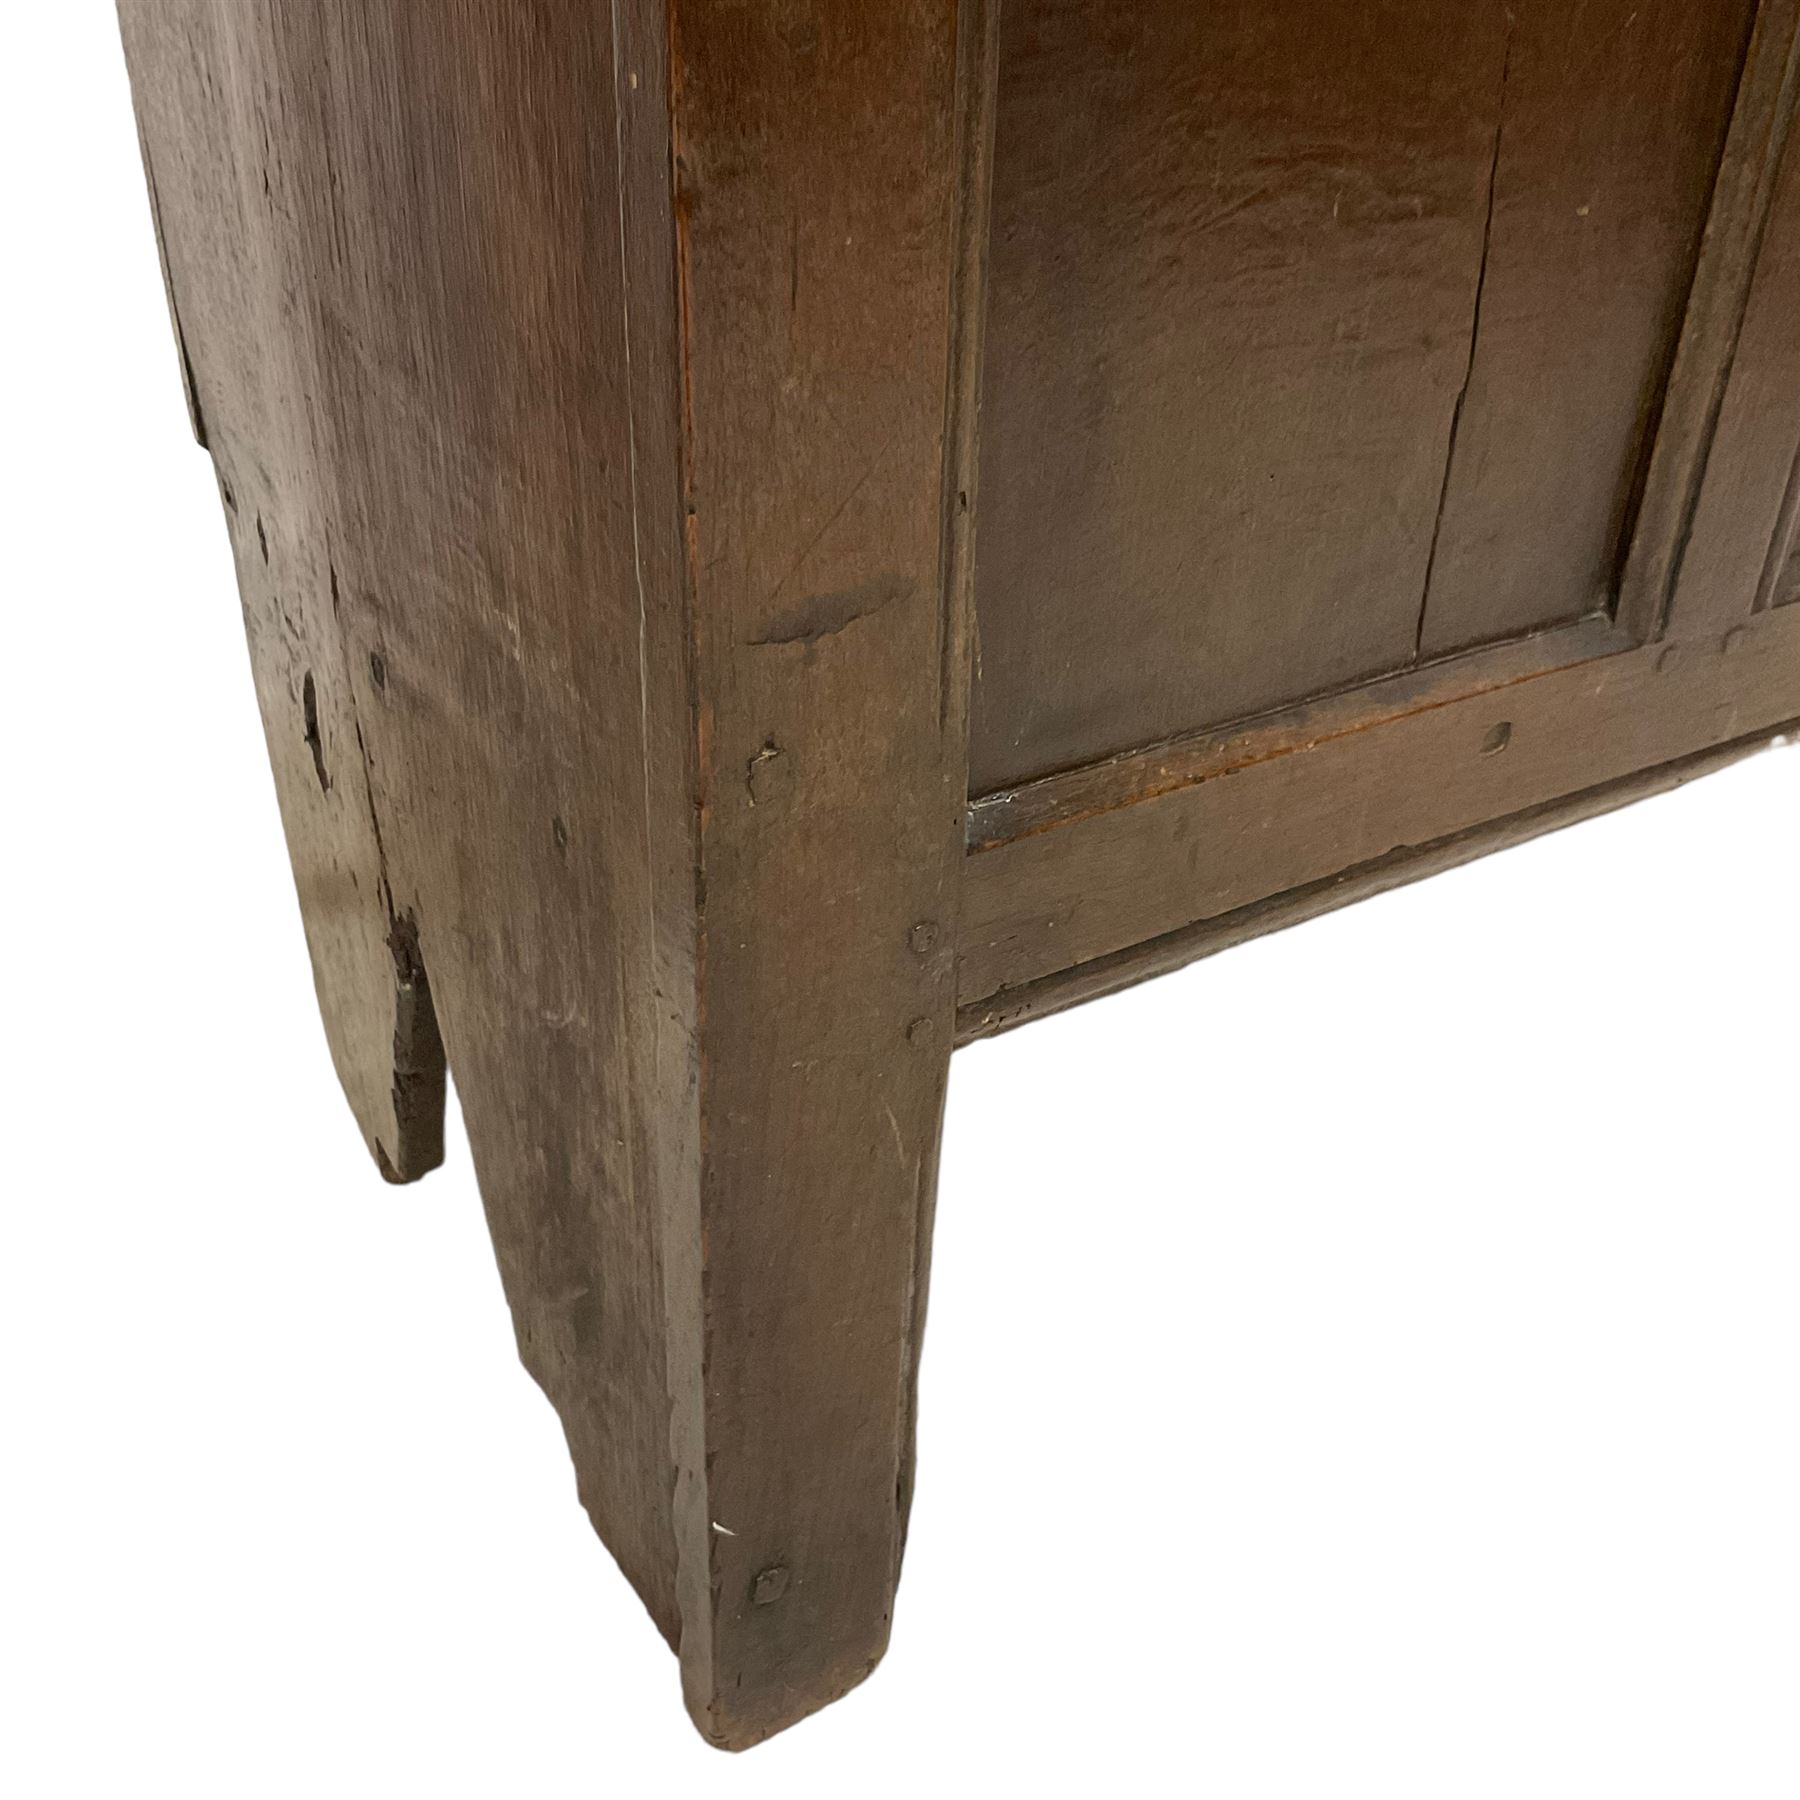 17th century oak six plank coffer or chest - Image 8 of 8